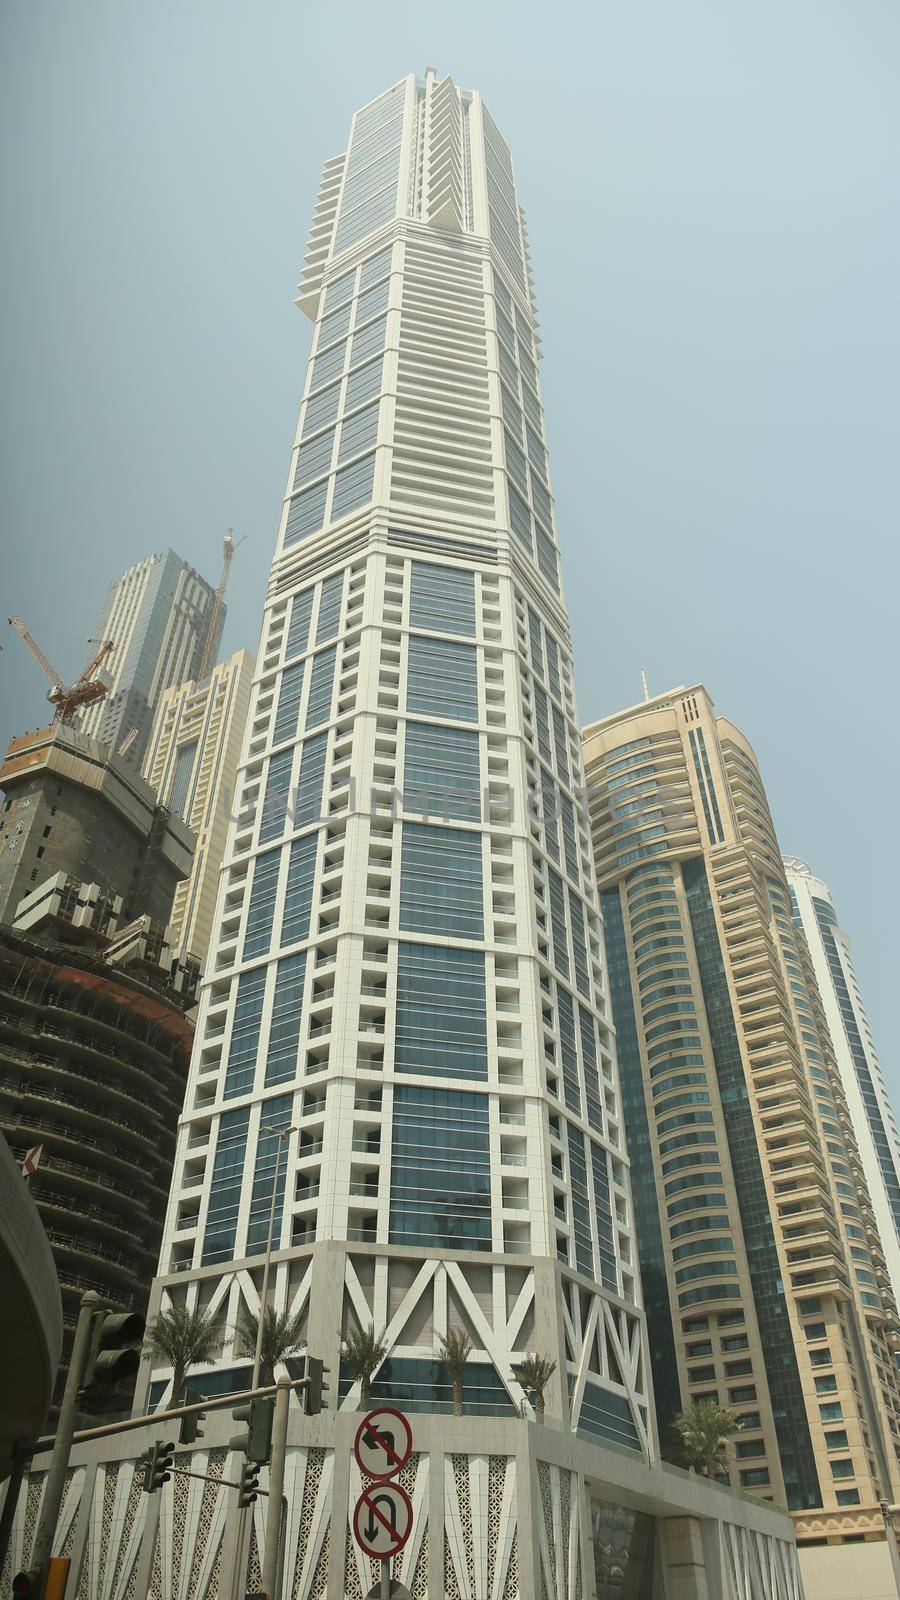 Residential skyscrapers with apartments in Dubai. UAE. by DovidPro